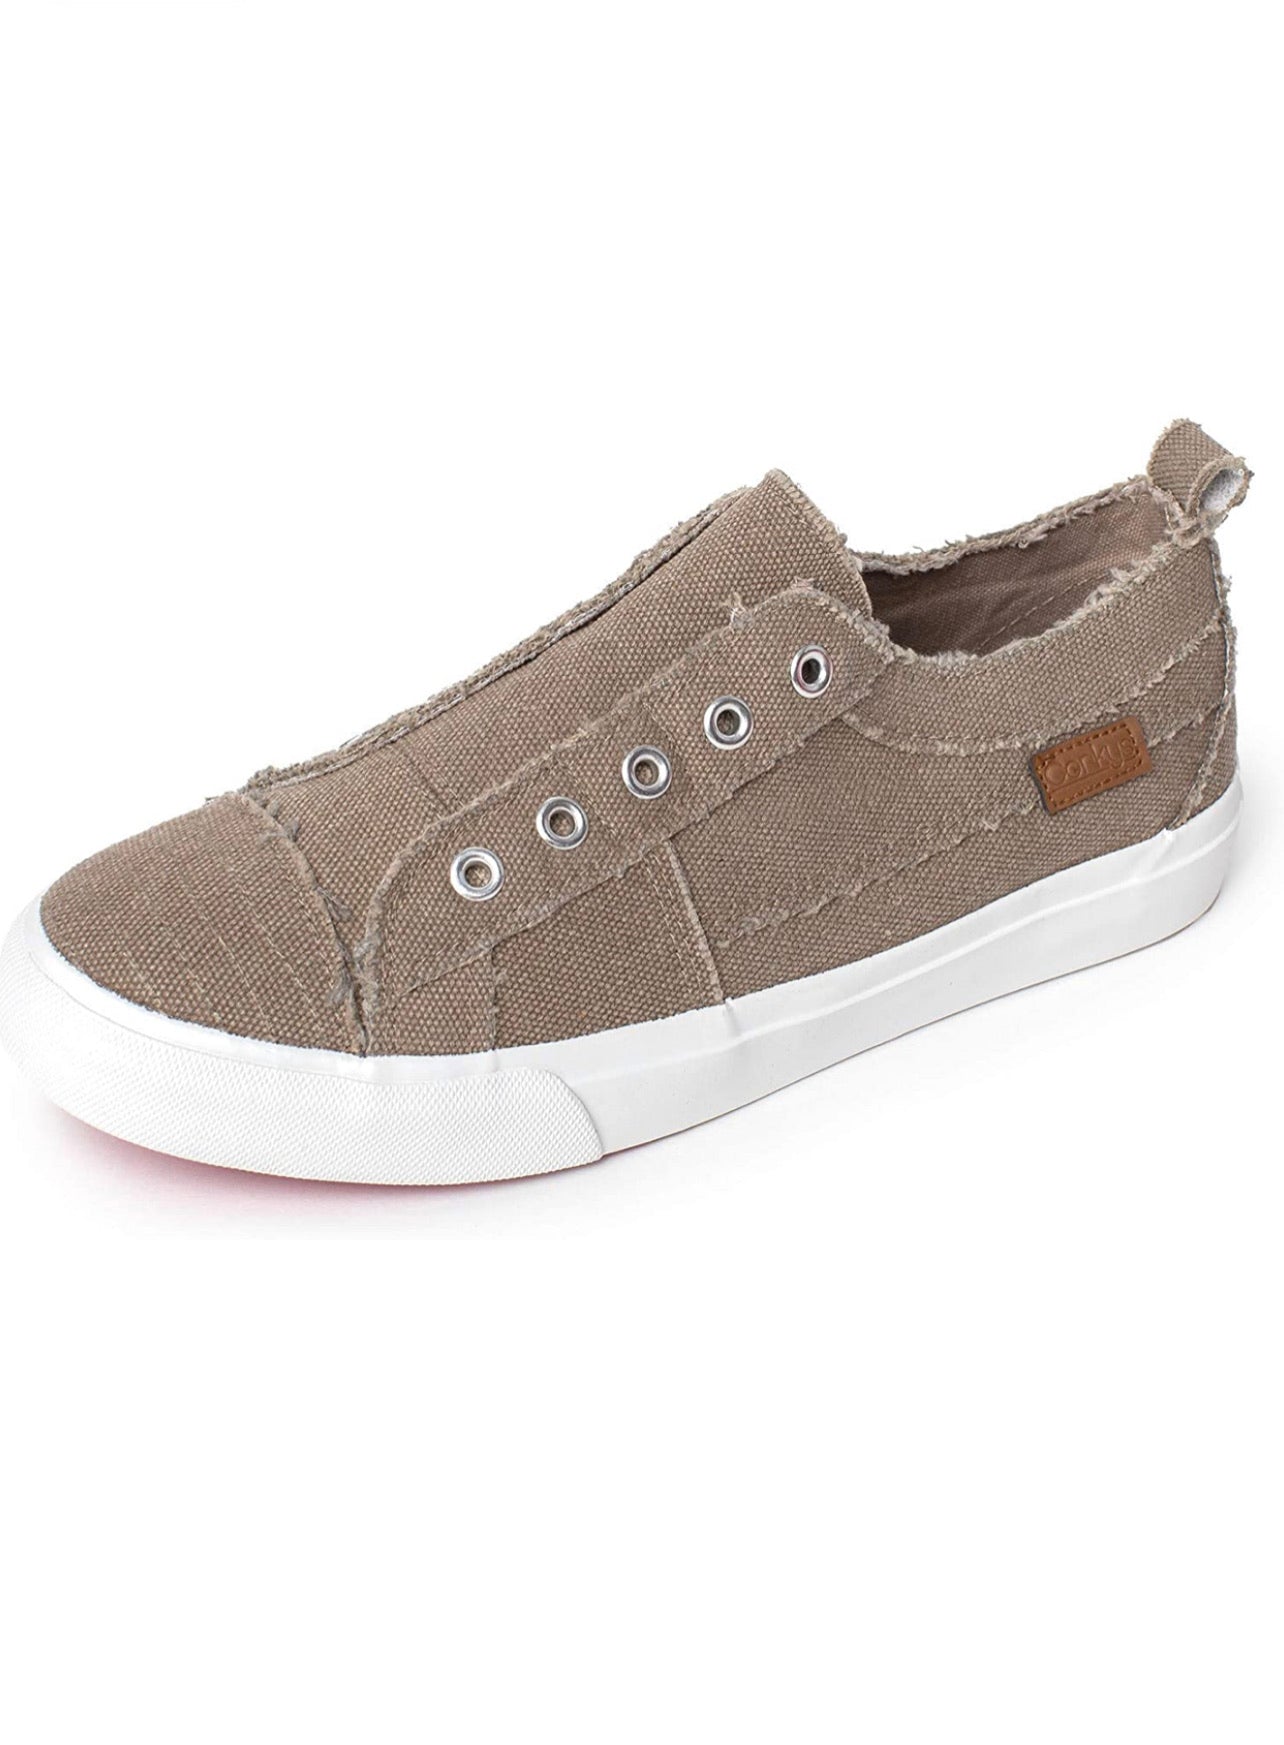 Corky's Babalu Sneakers - Taupe